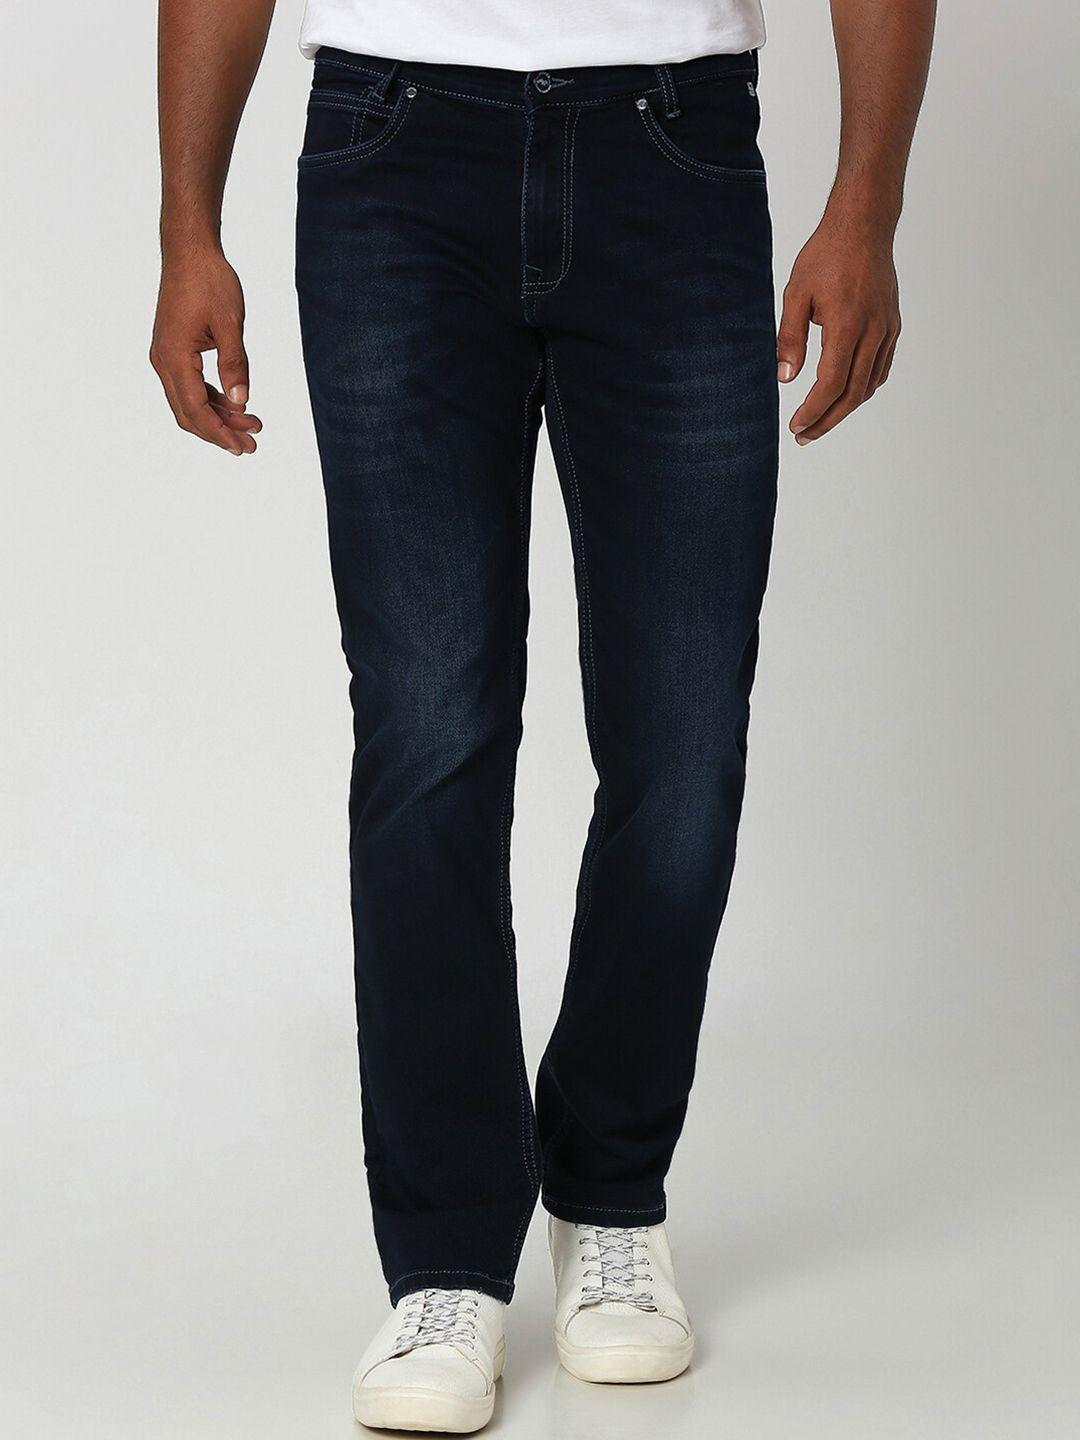 mufti-men-straight-fit-light-fade-stretchable-jeans